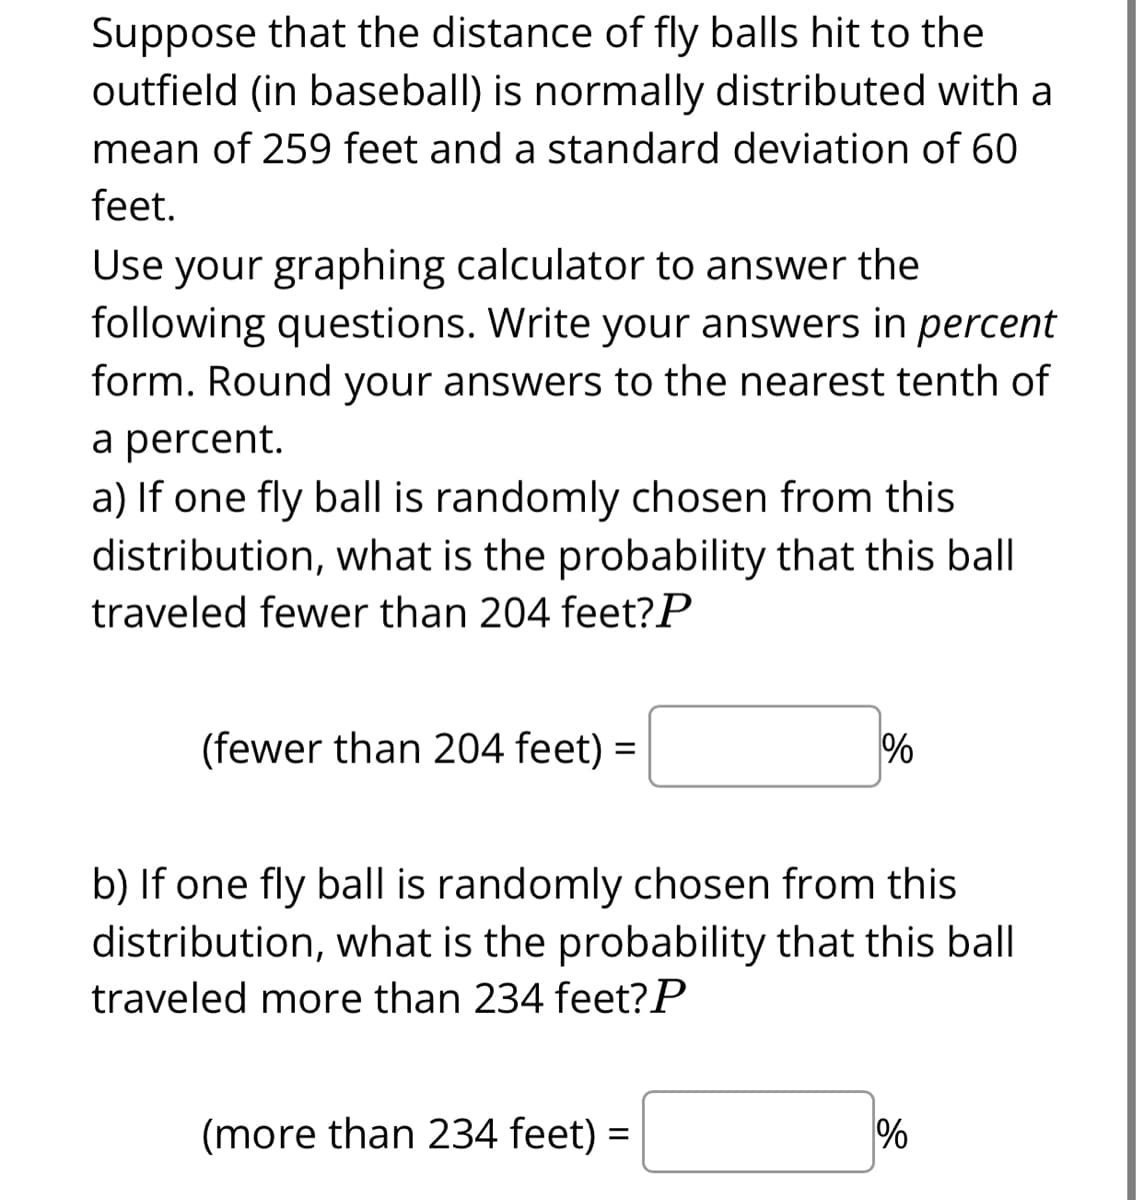 Suppose that the distance of fly balls hit to the
outfield (in baseball) is normally distributed with a
mean of 259 feet and a standard deviation of 60
feet.
Use your graphing calculator to answer the
following questions. Write your answers in percent
form. Round your answers to the nearest tenth of
a percent.
a) If one fly ball is randomly chosen from this
distribution, what is the probability that this bal
traveled fewer than 204 feet?P
(fewer than 204 feet) =
%
b) If one fly ball is randomly chosen from this
distribution, what is the probability that this ball
traveled more than 234 feet?P
(more than 234 feet) =
%
